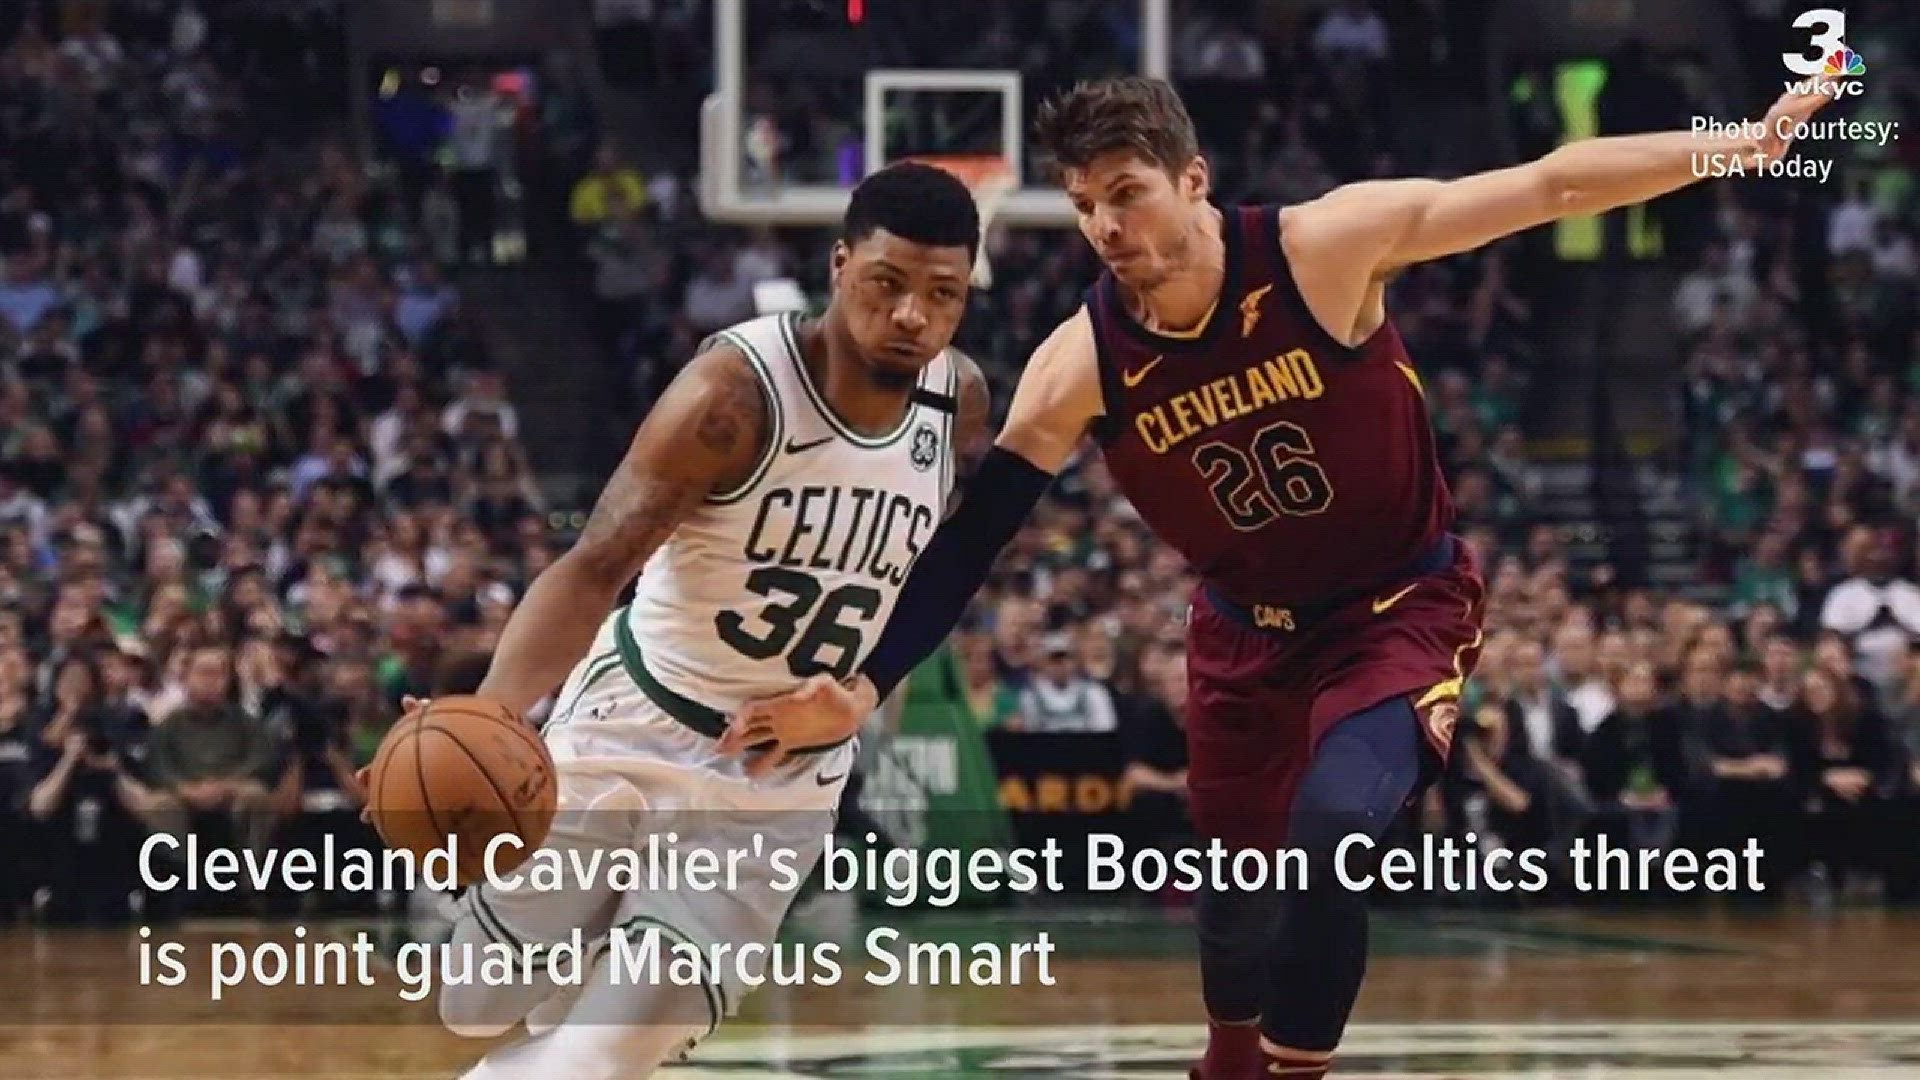 The Cleveland Cavaliers have struggled to account for Boston Celtics point guard Marcus Smart through the first two games of the Eastern Conference Finals.